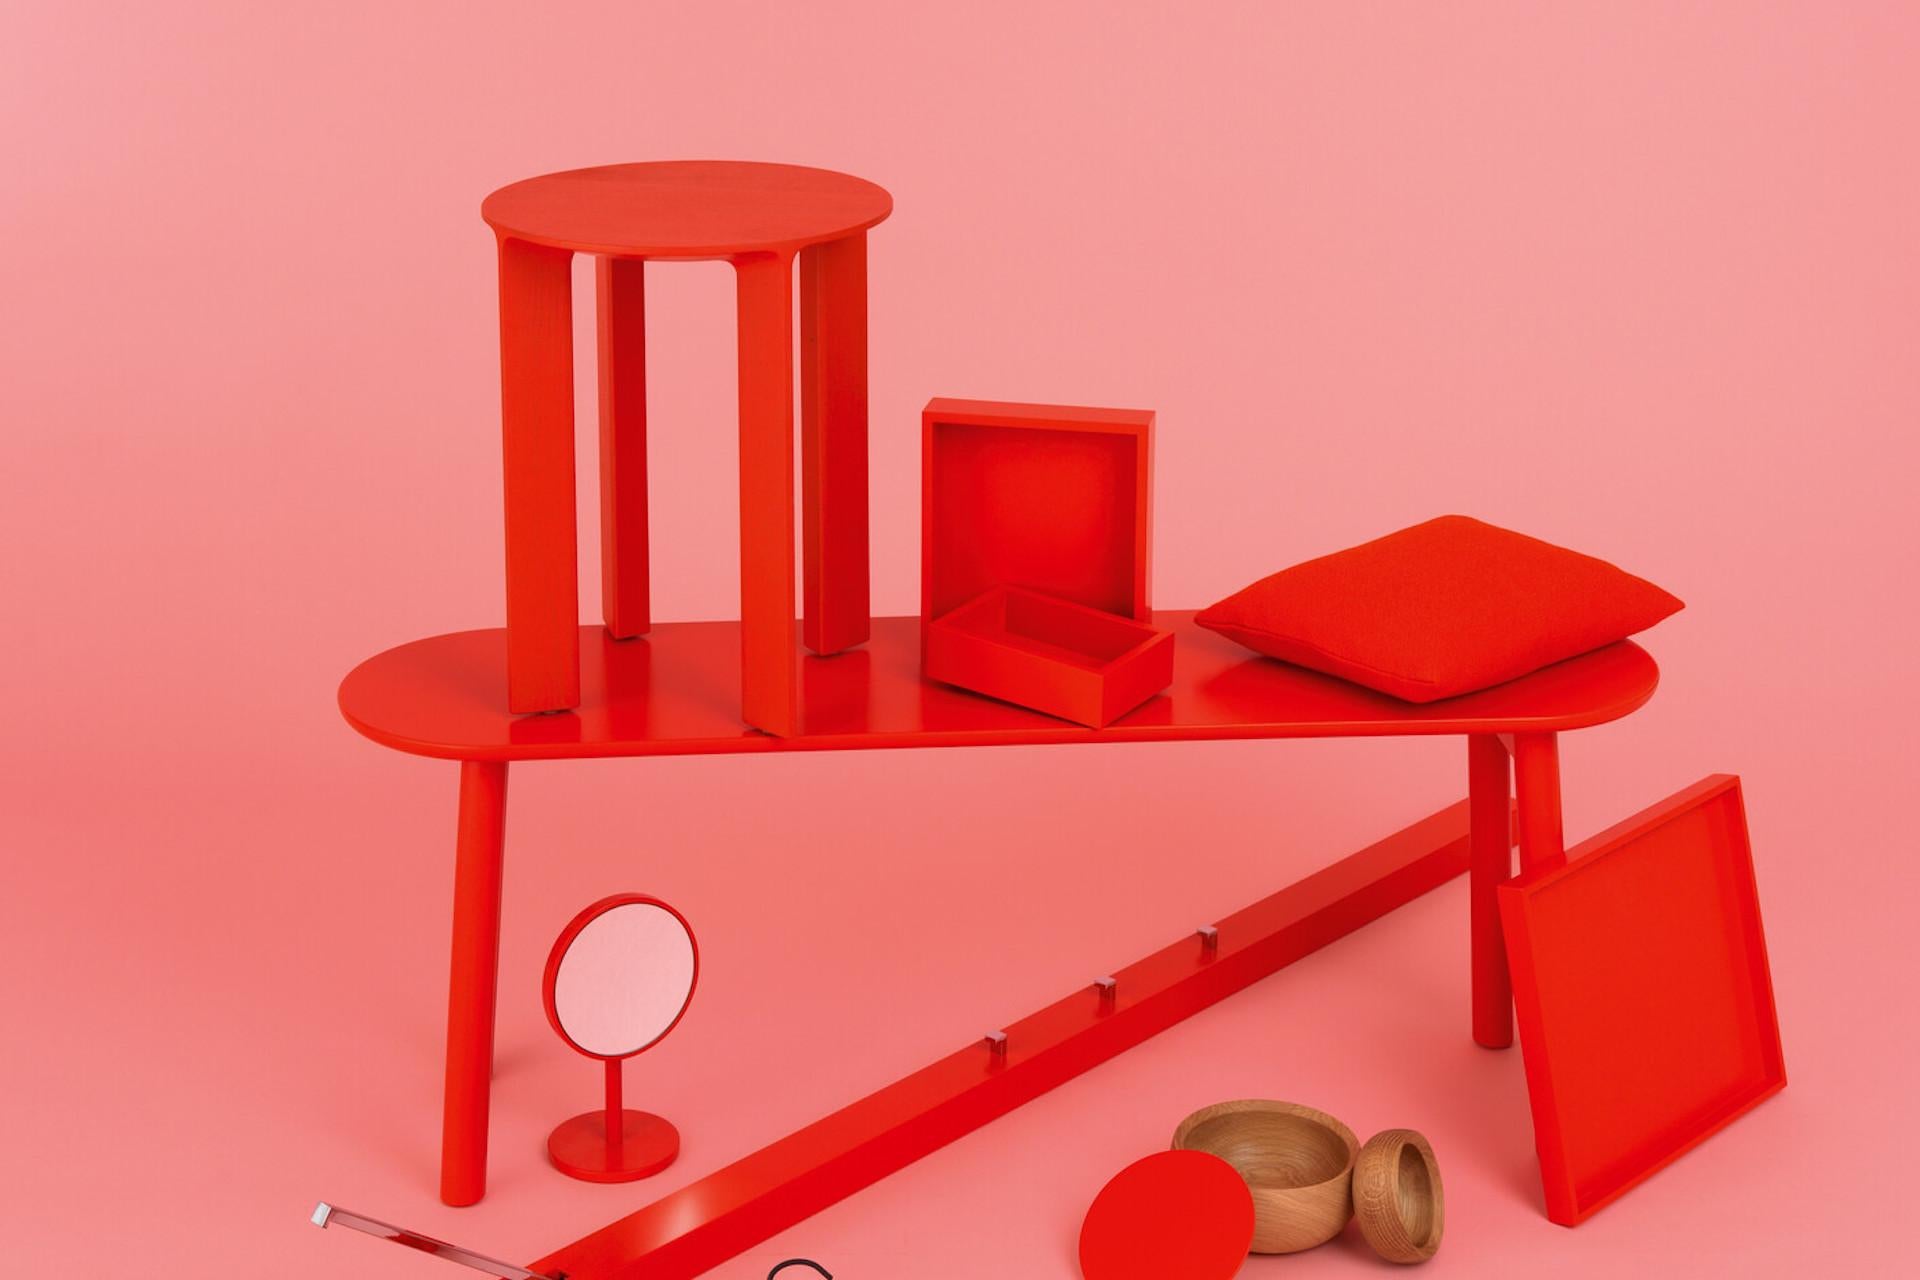 NEW Schonbuch Coral Box S Tally
TALLY is a versatile tray and comes in a choice of interesting lacquer colours and three different sizes. Alone or in a group, side by side or one inside the other, TALLY offers inspiration for creative arrangements